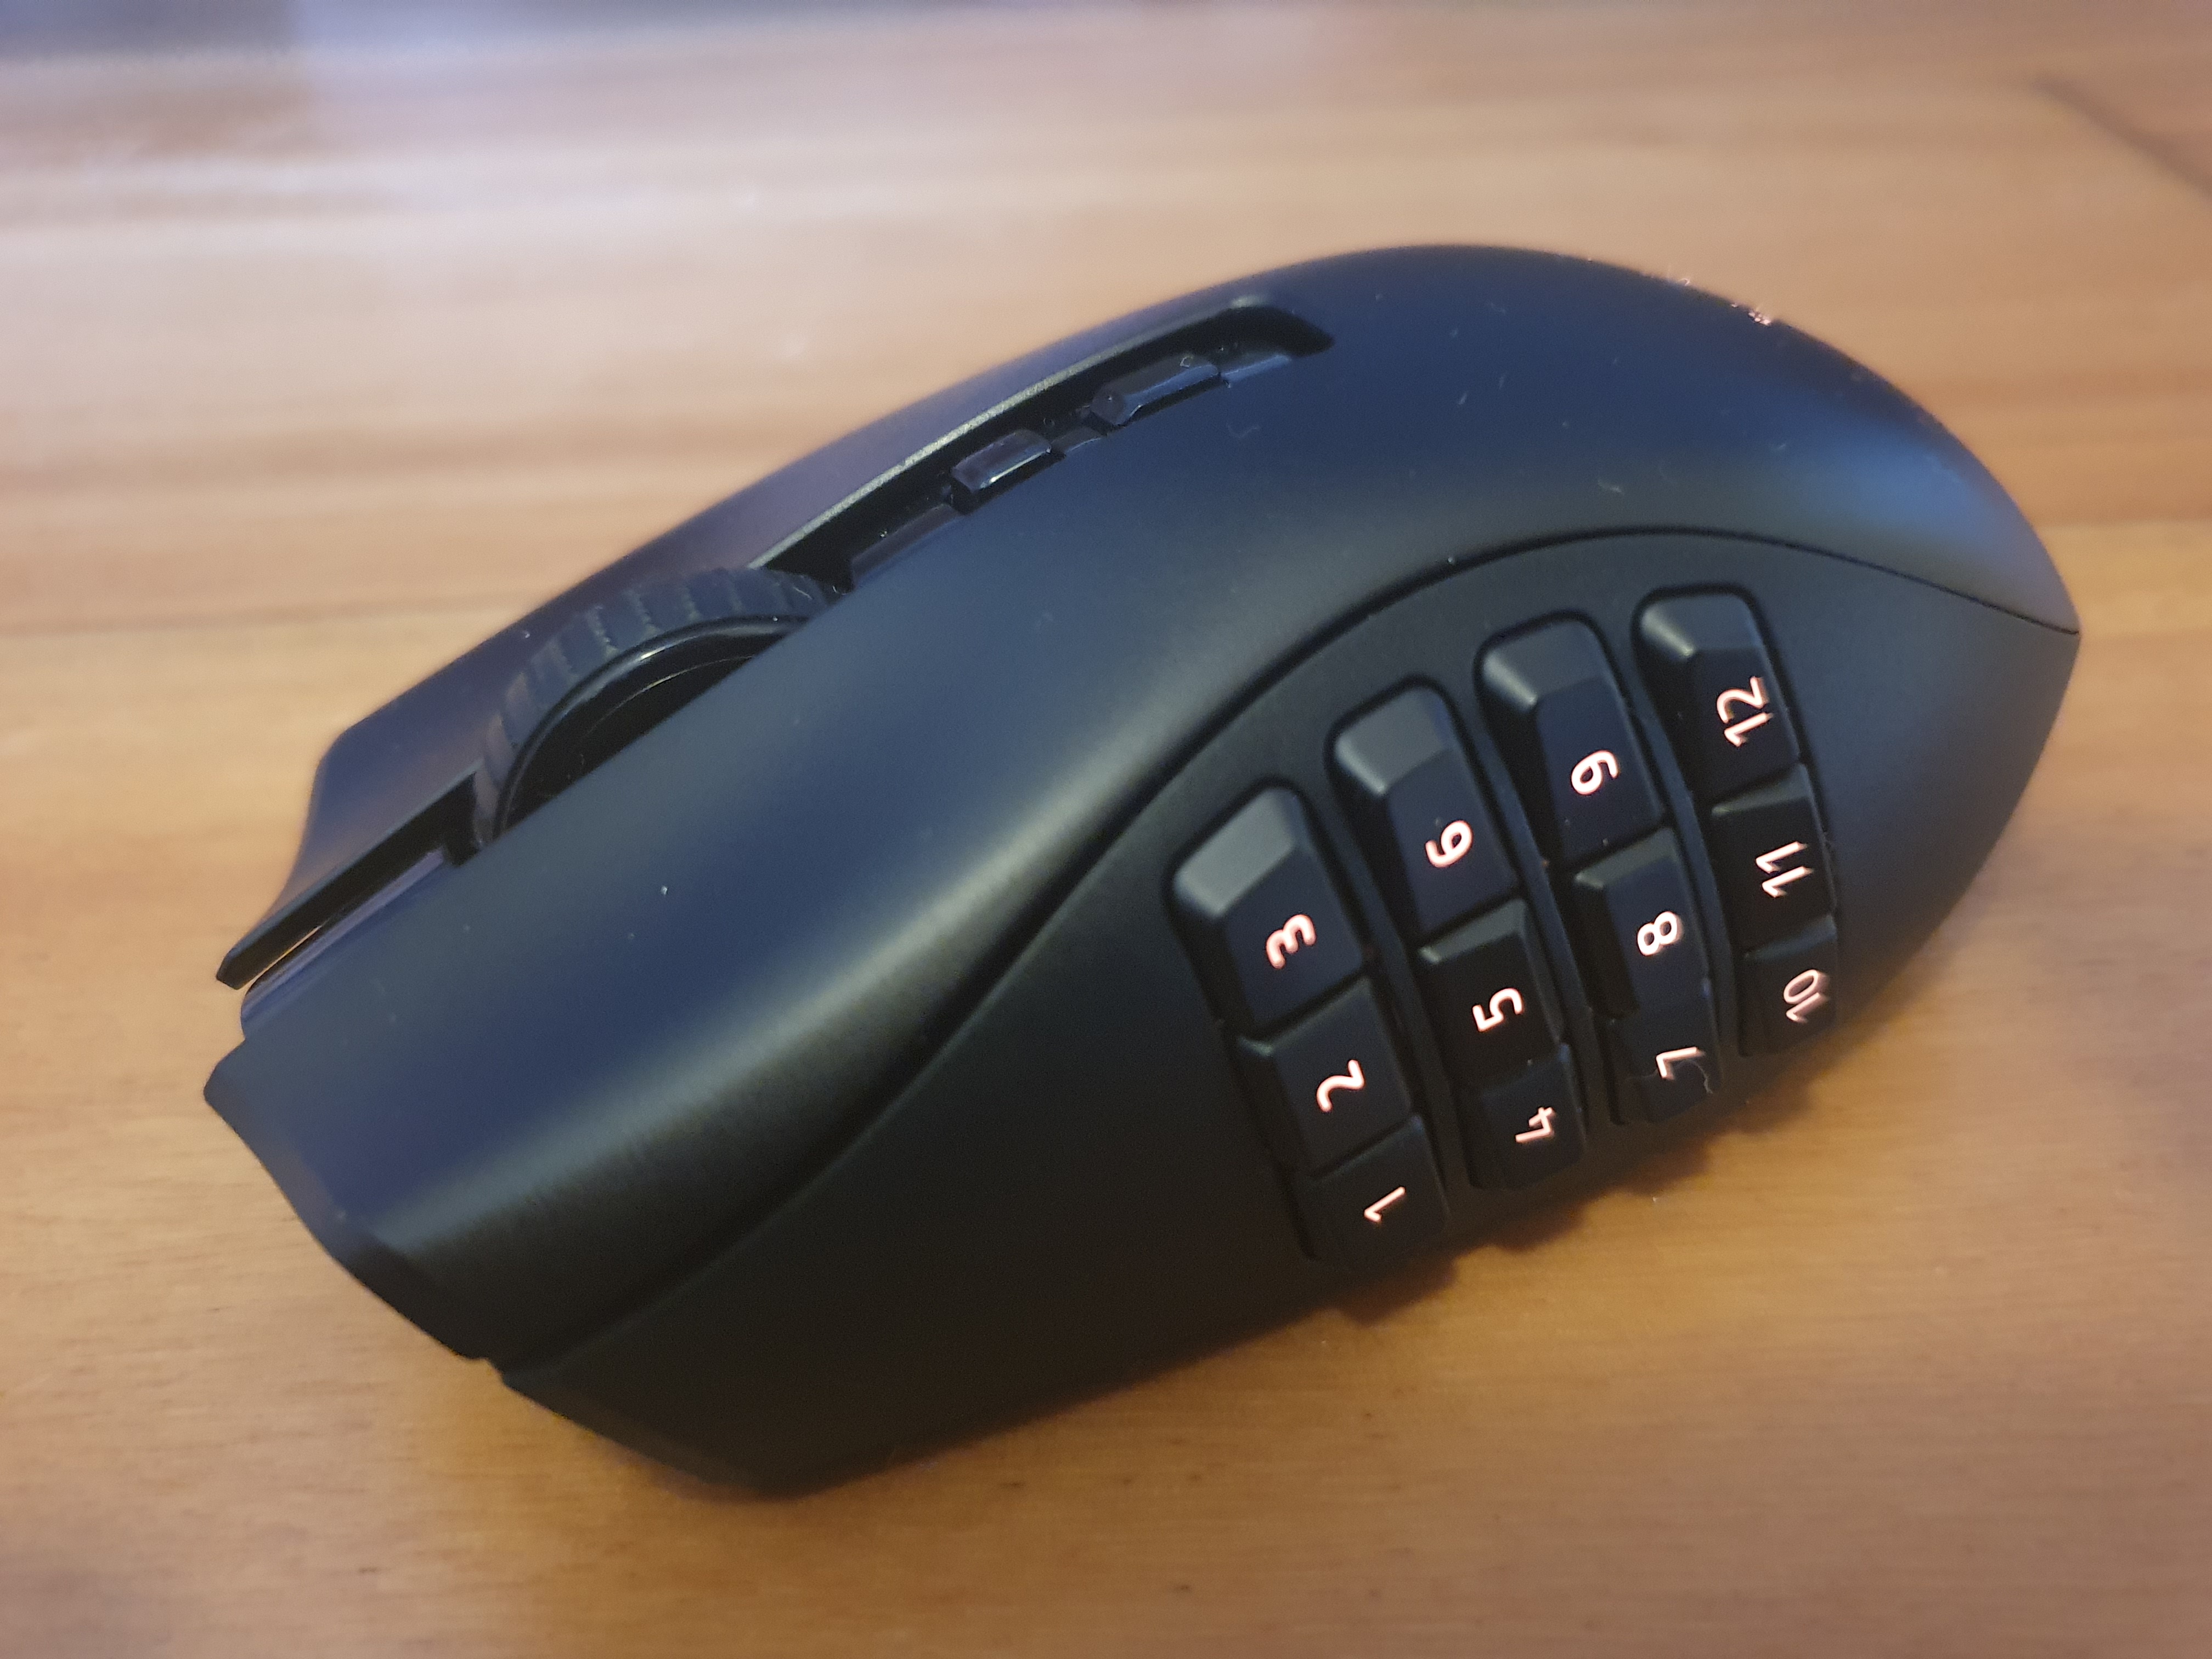 Razer Naga V2 Pro - Handiest gaming mouse for MOBA and MMO games 